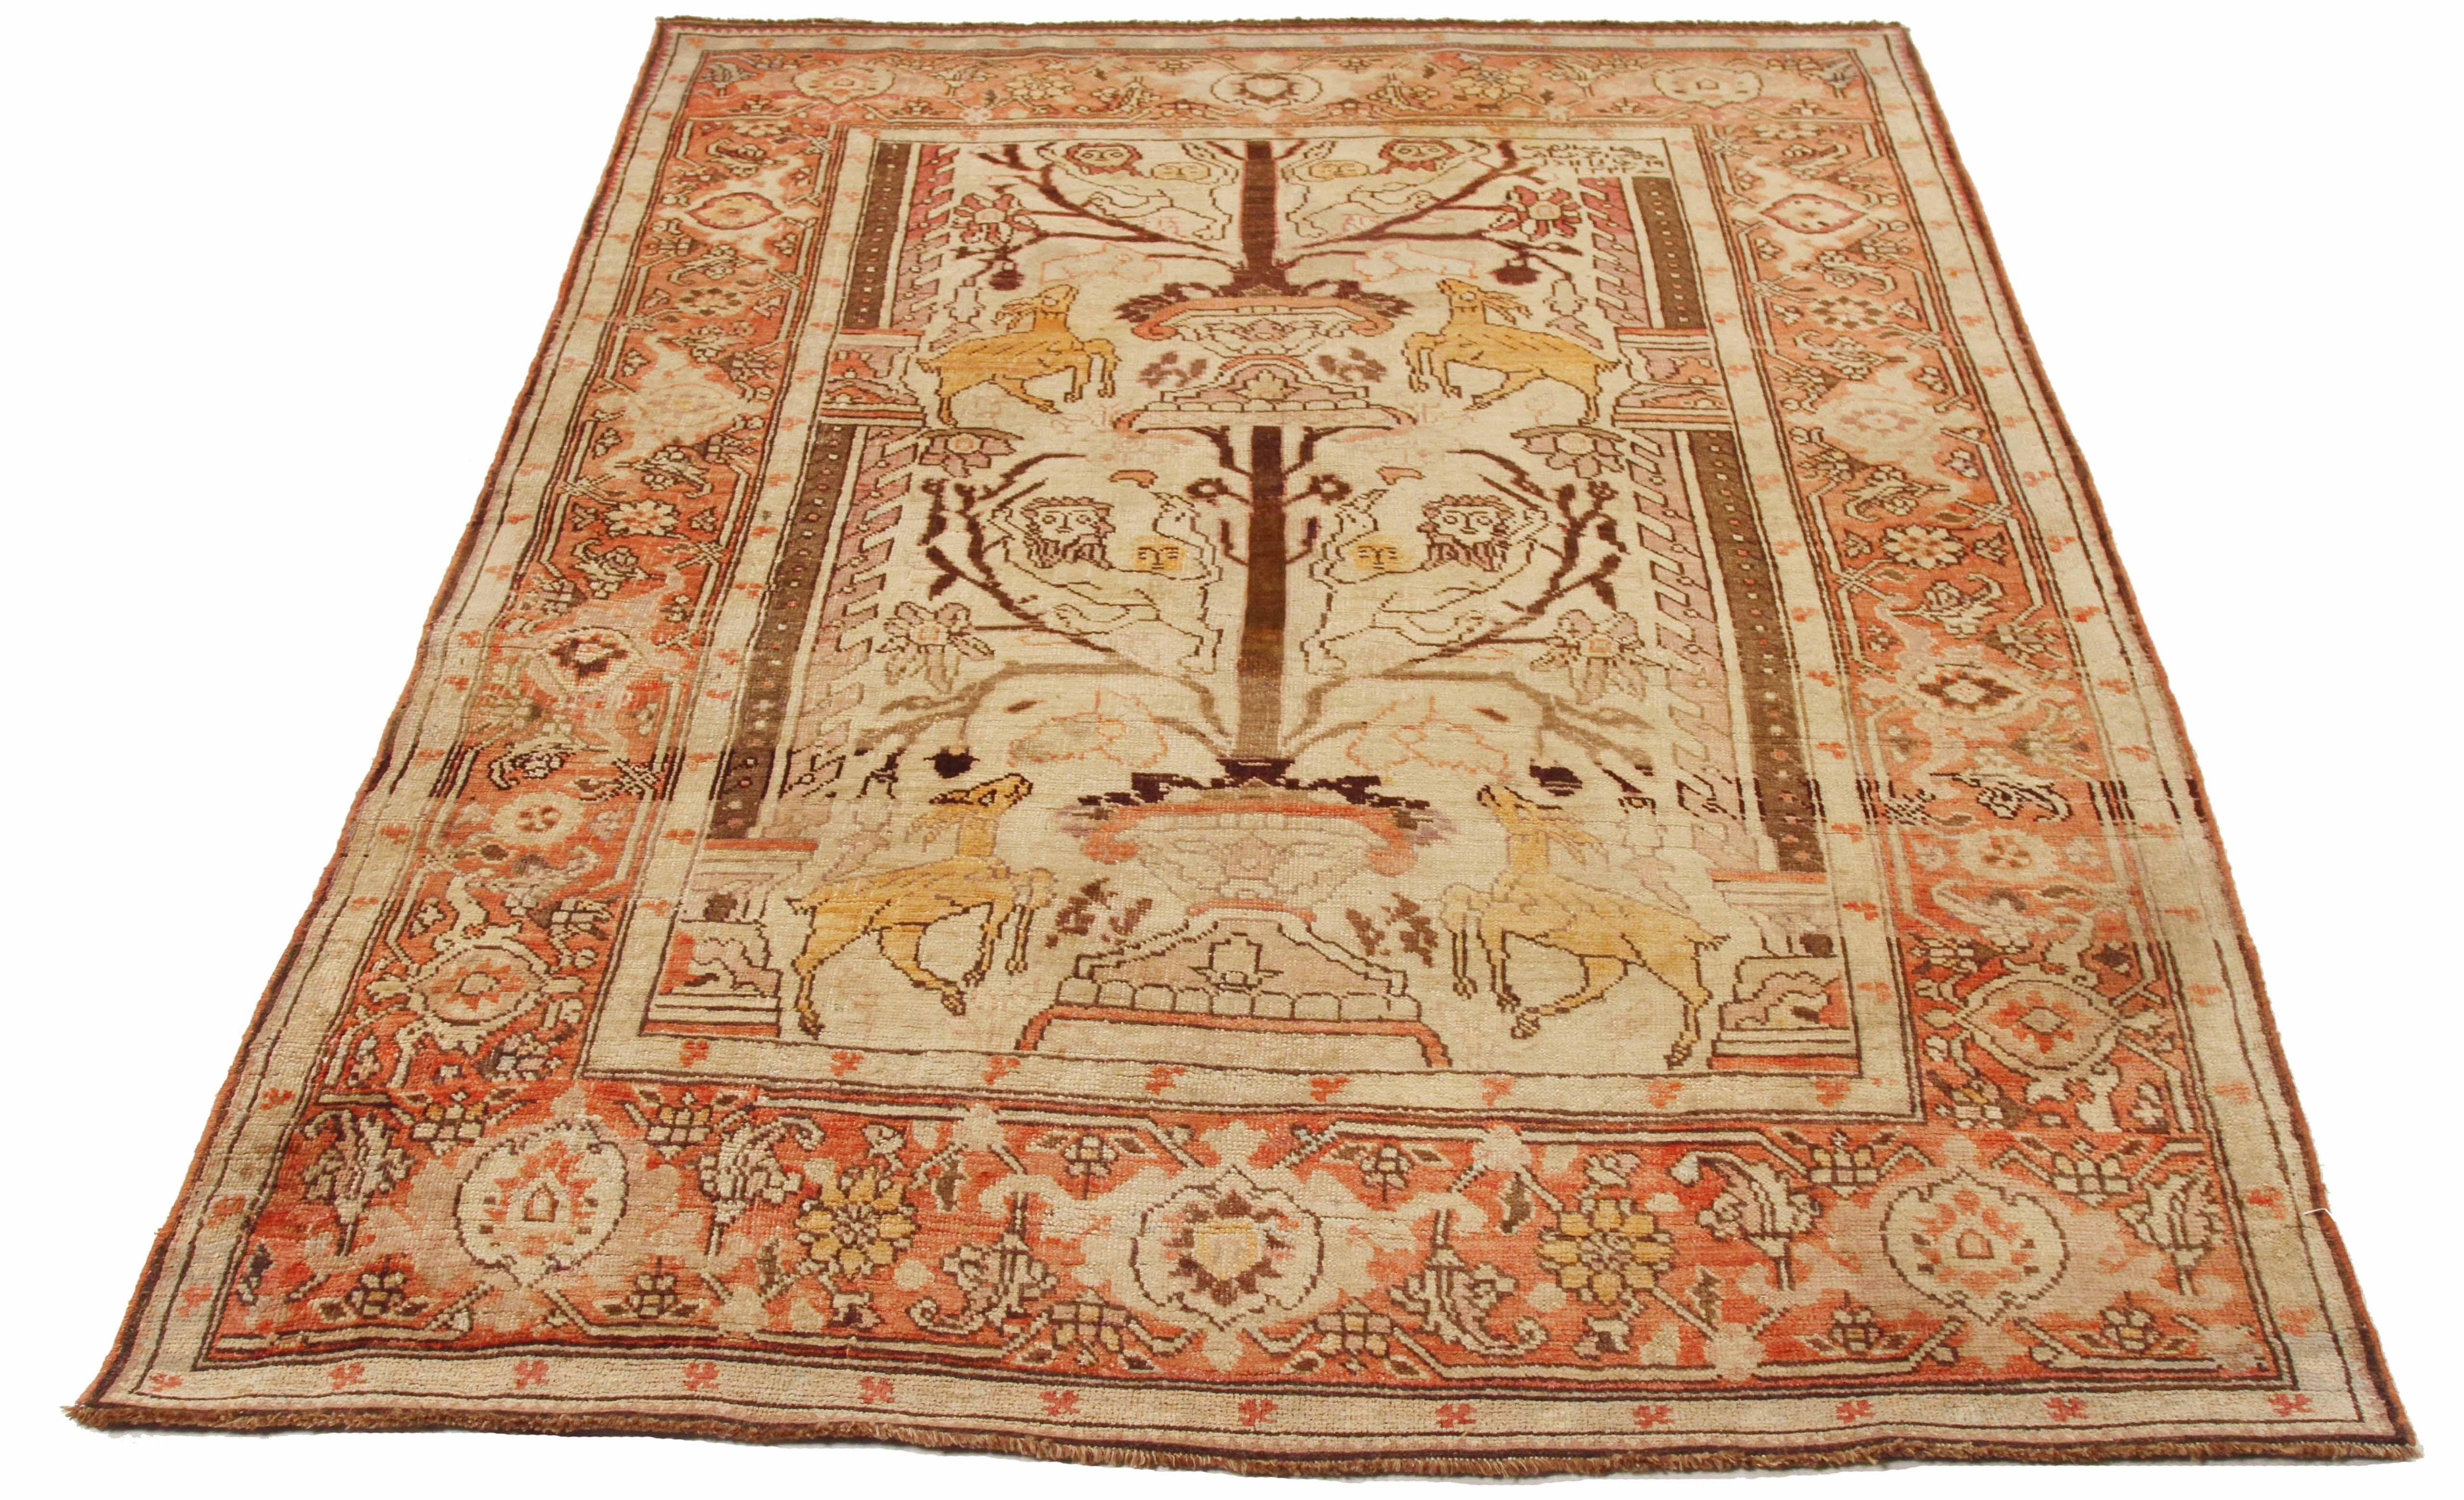 Antique Russia area rug handwoven from the finest sheep’s wool. It’s colored with all-natural vegetable dyes that are safe for humans and pets. It’s a traditional Karabagh design handwoven by expert artisans. It’s a lovely area rug that can be